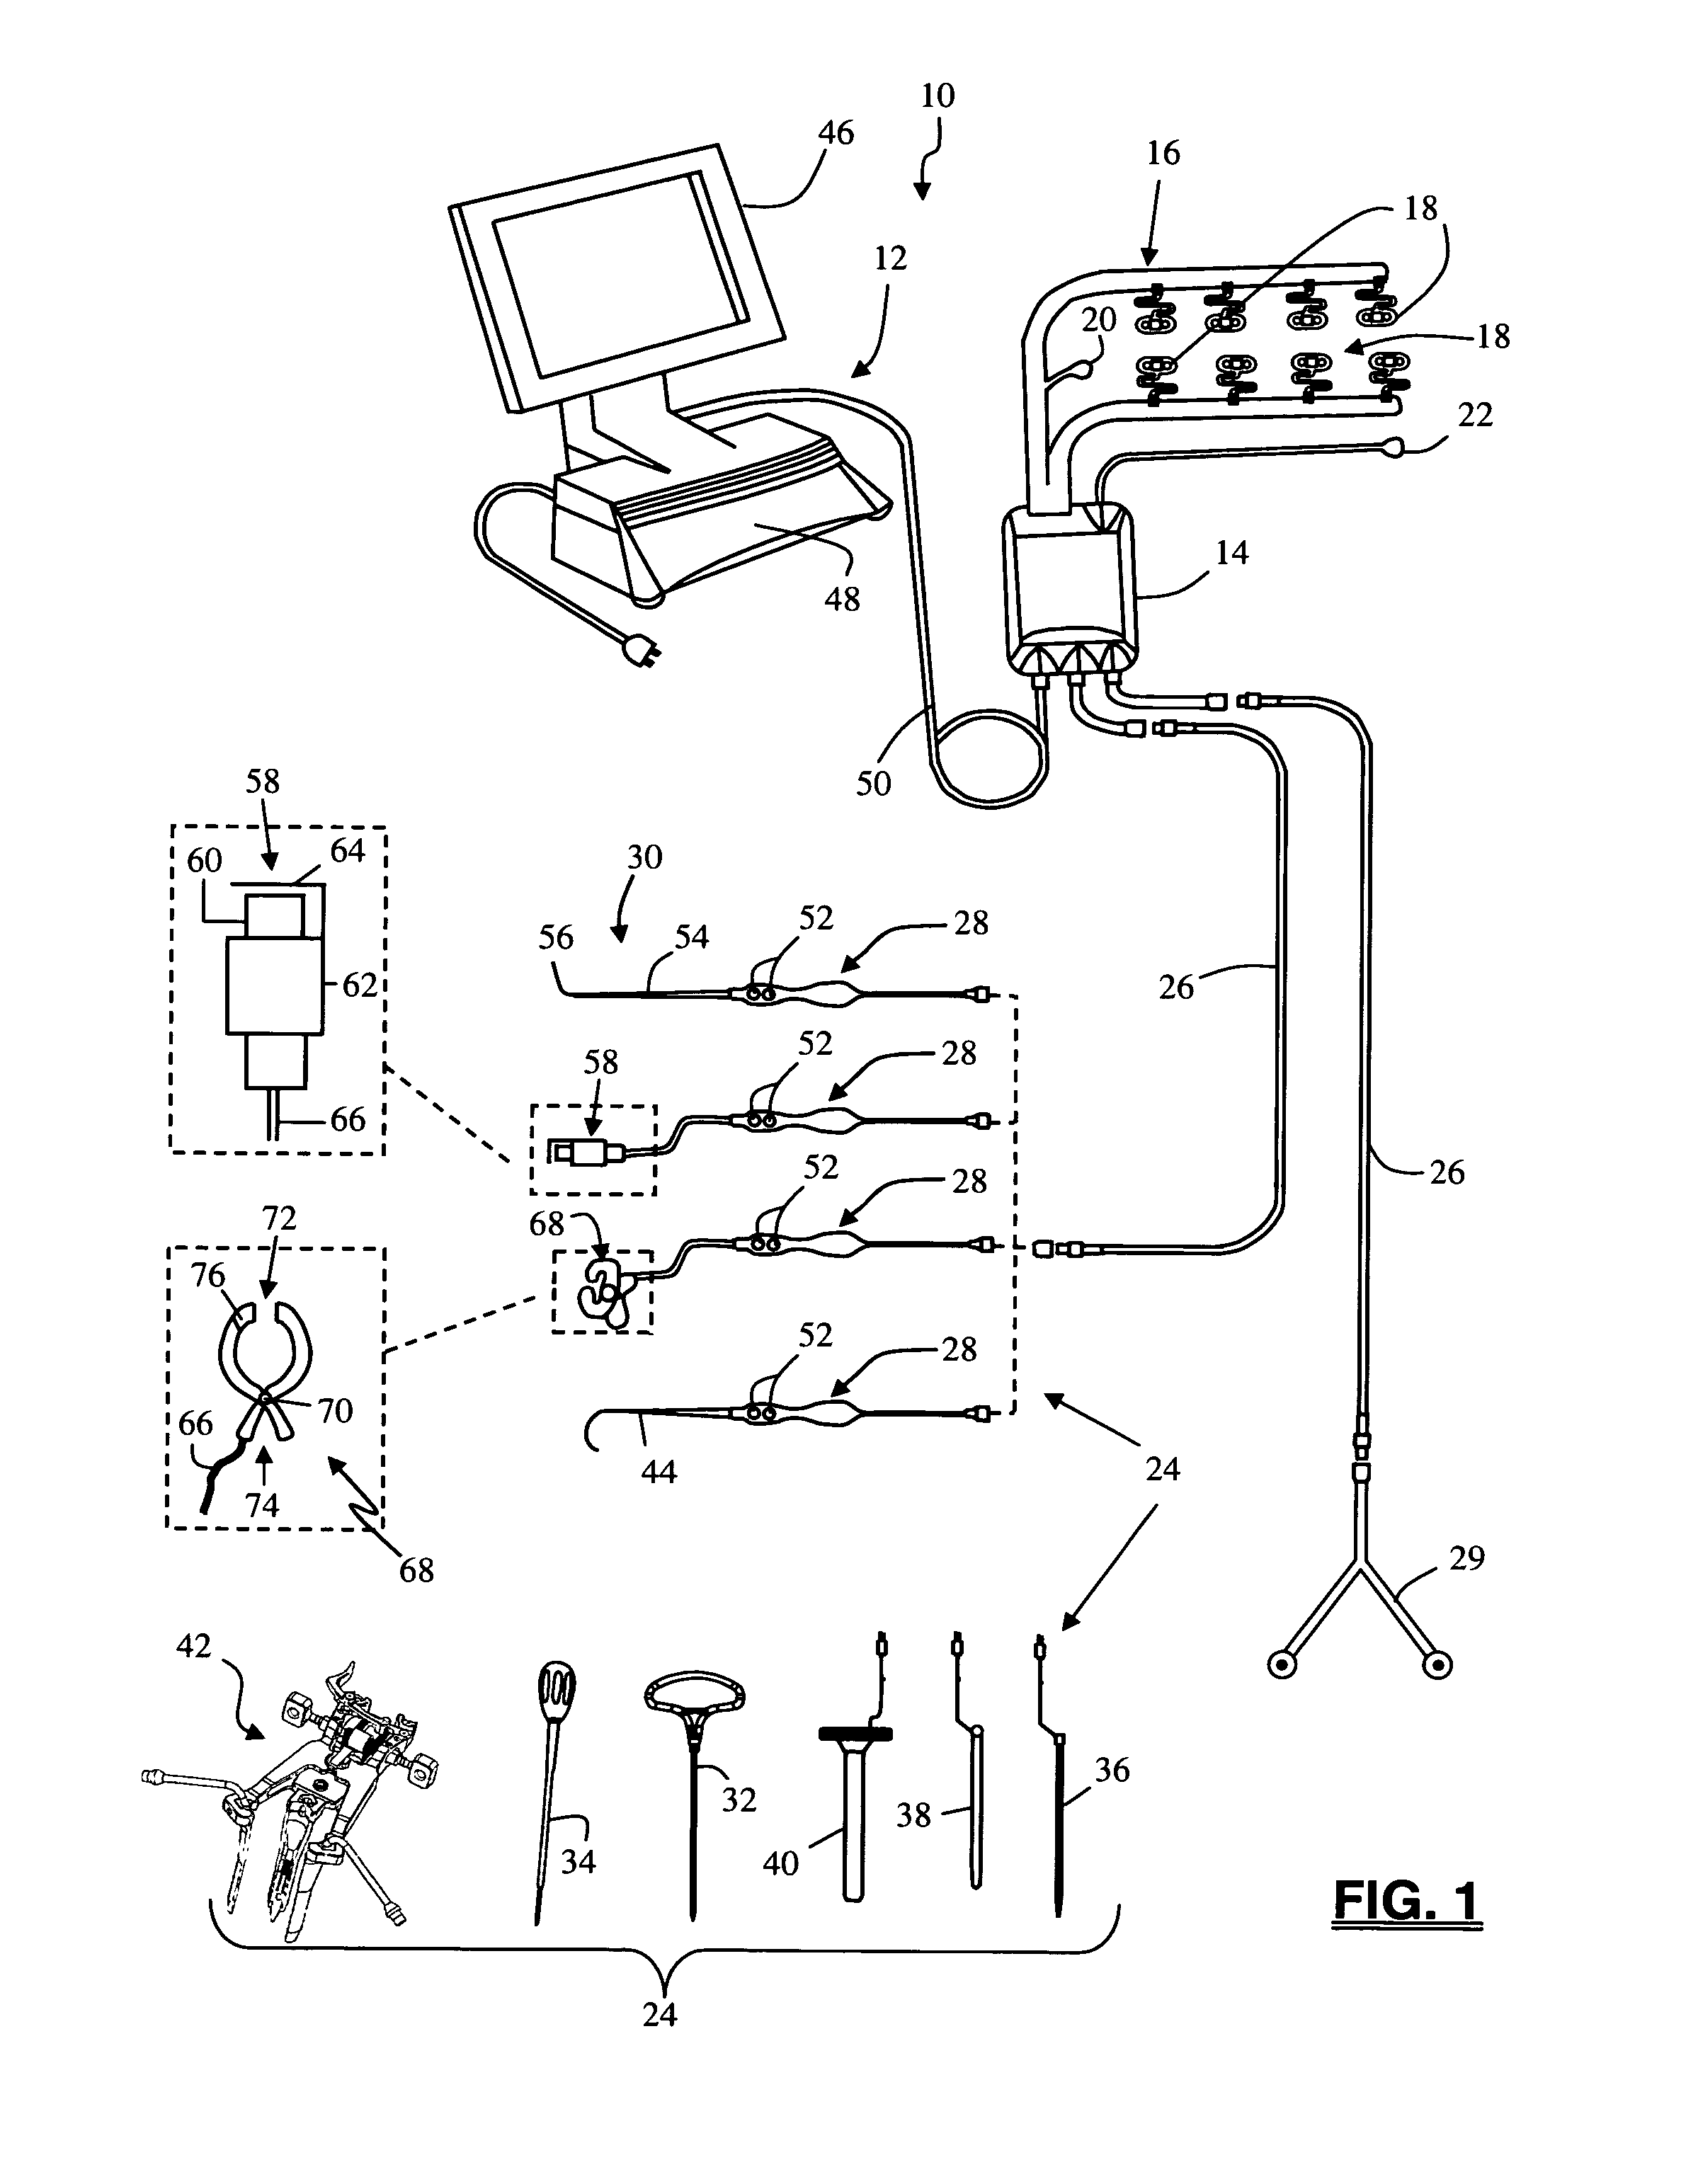 System and methods for nerve monitoring